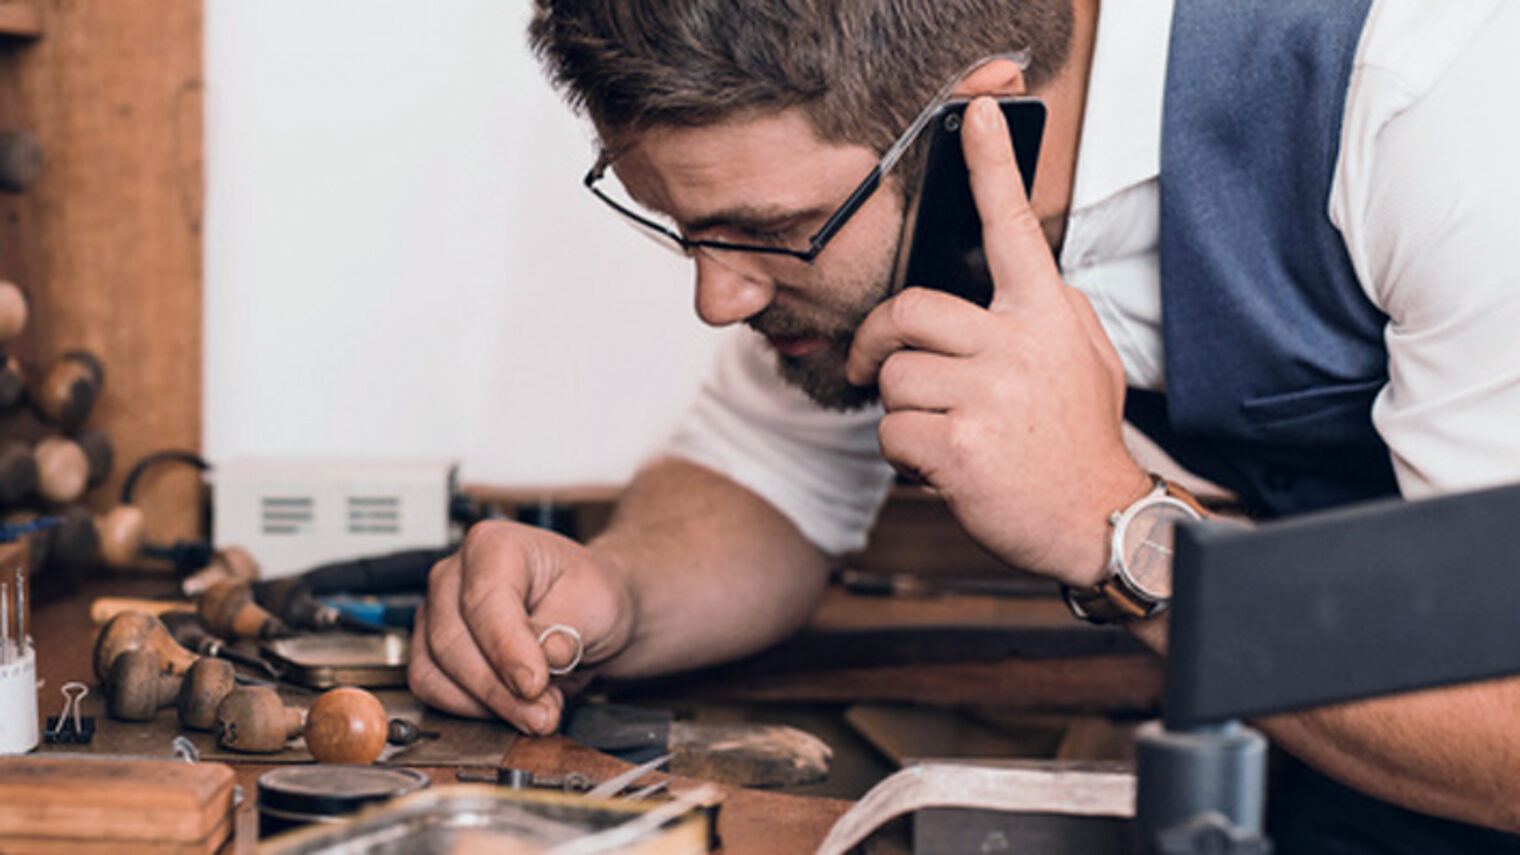 Young jeweler examining a ring and talking on a cellphone while leaning over a workbench full of tools in his shop Schlagwort(e): adult, artisan, caucasian, cellphone, communication, concentration, copy space, craft, crafting, craftsmanship, creative, designer, entrepreneur, equipment, examining, expertise, fixing, focus, glasses, handicraft, handiwork, handmade, holding, industry, inscription, inside, jeweler, jewelry, jewelry design, job, looking, making, male, manufacturing, men, occupation, one, person, phone, profession, reading, skilled, small business, talking, tools, workbench, working, workmanship, workshop, young